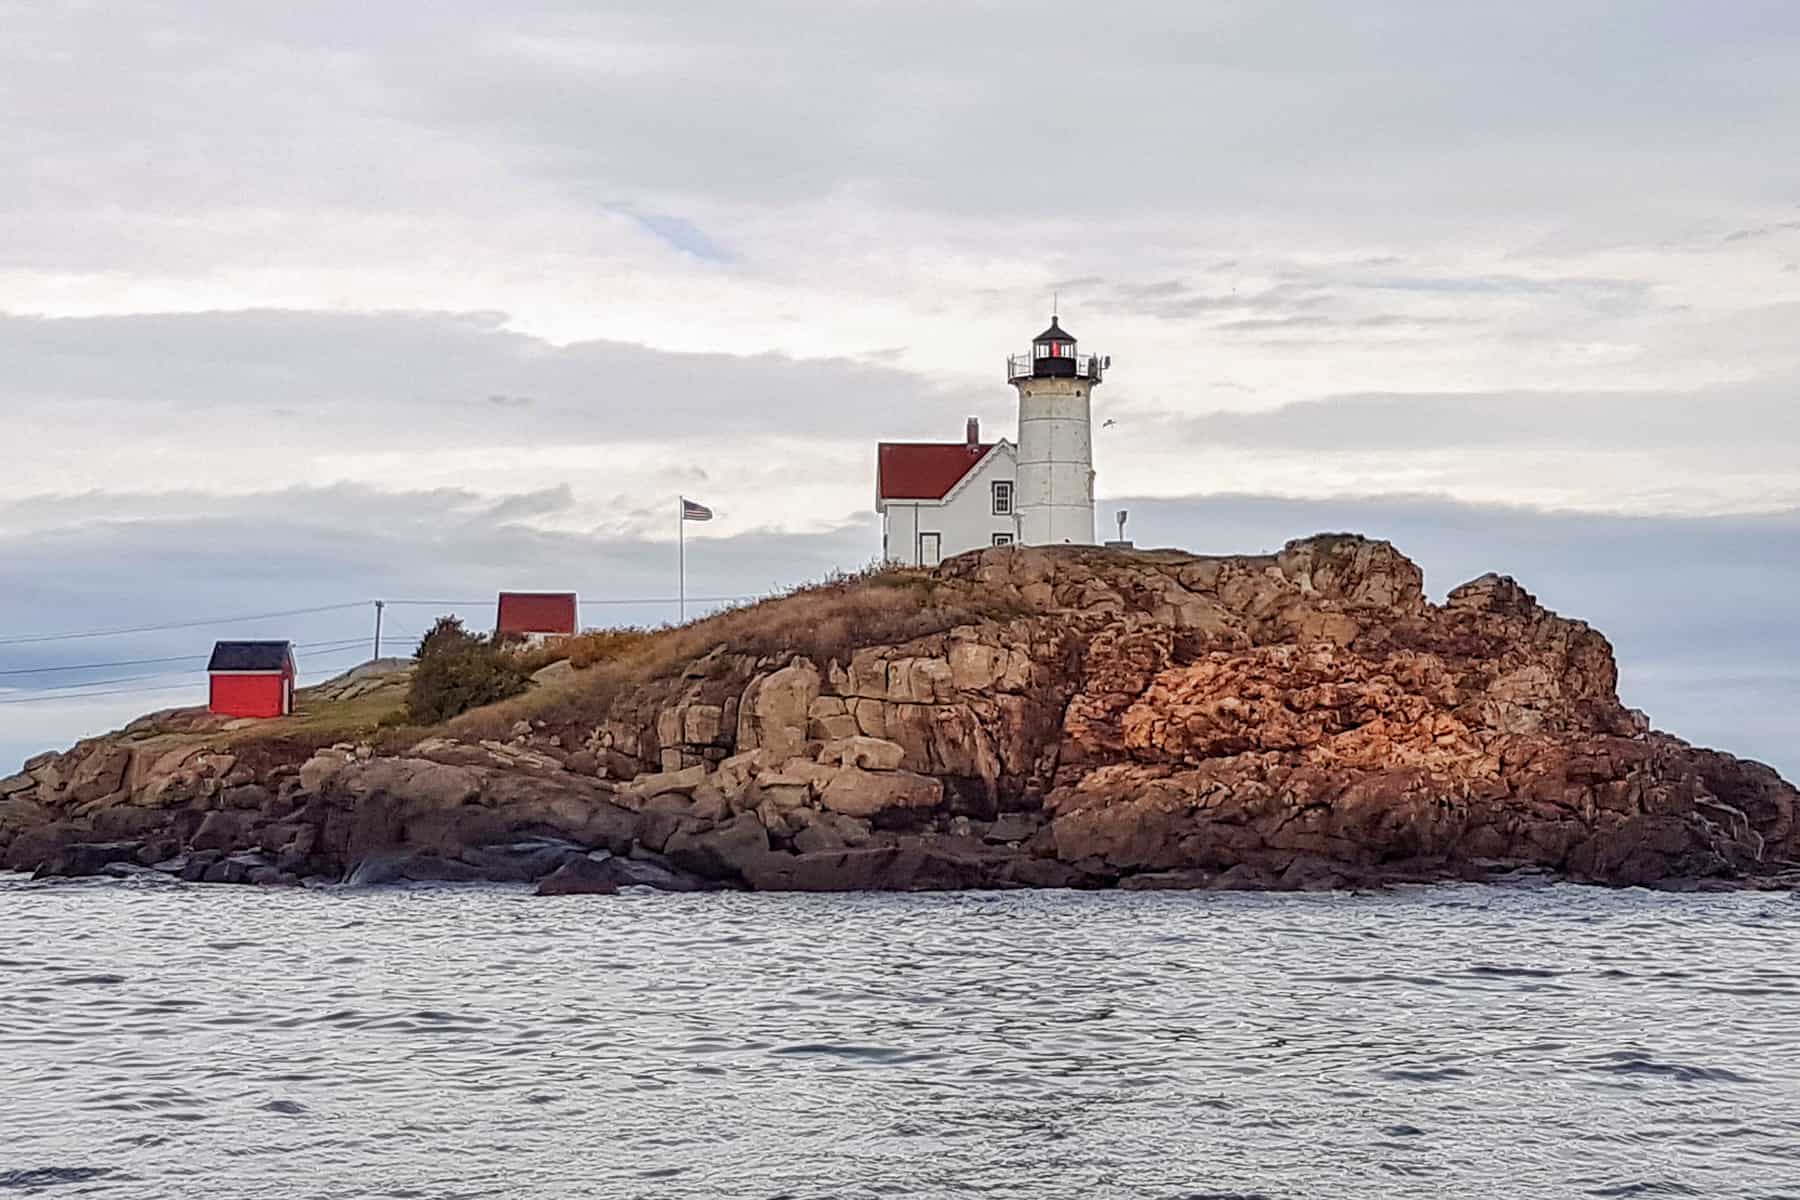 The small Nubble Lighthouse, built on a tiny mound of land off the rocky coastline of Maine, US 1. 